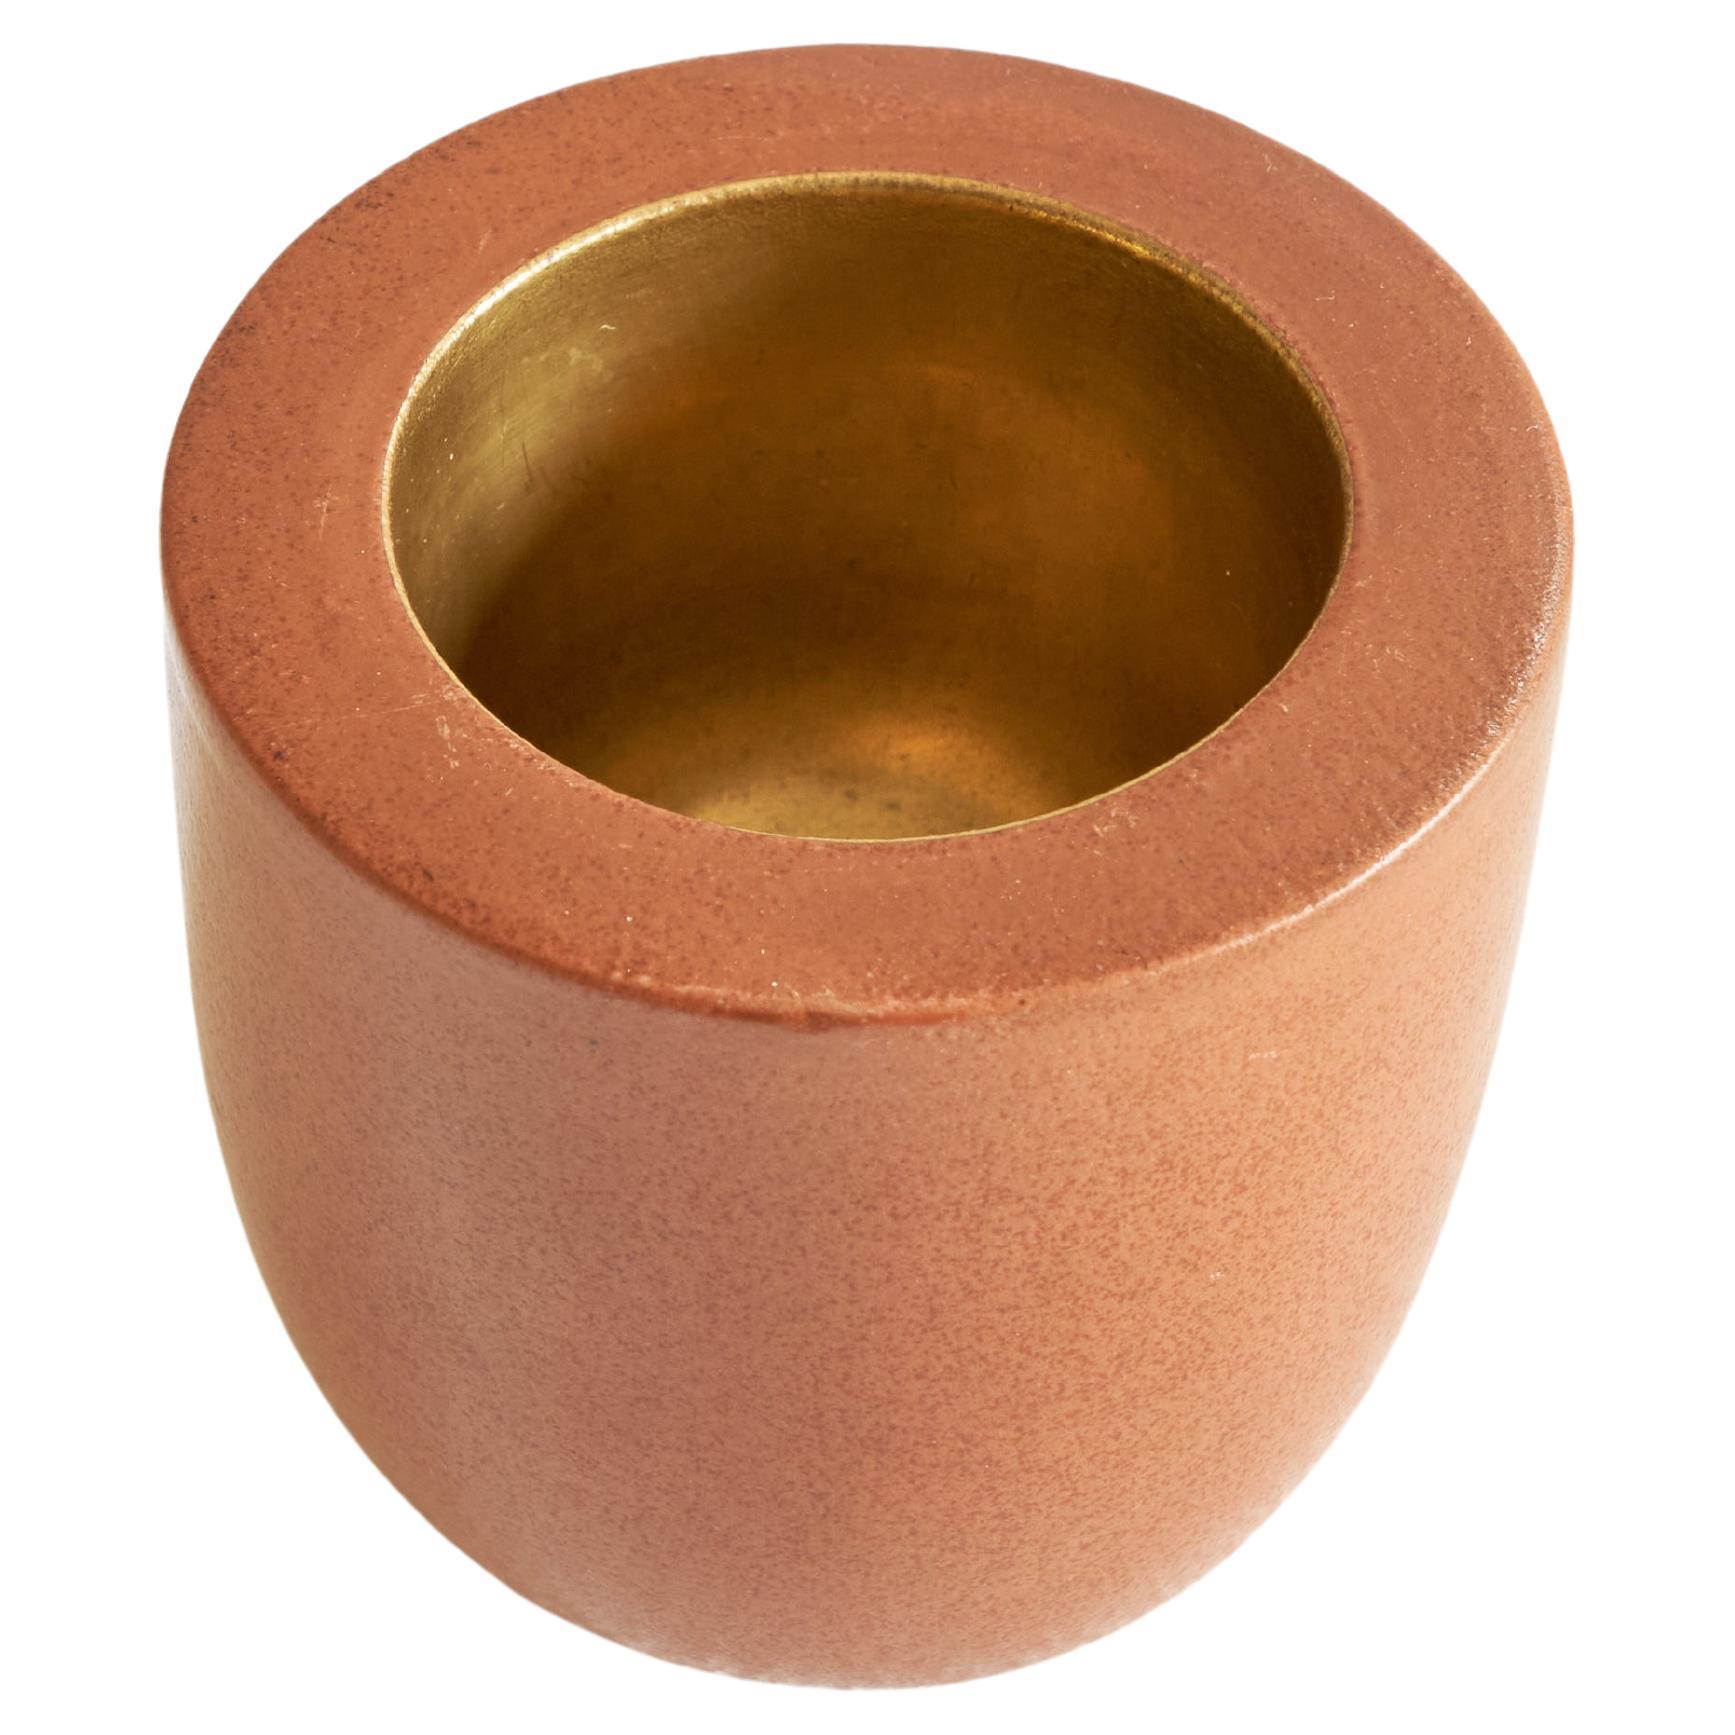 Gio Ponti for Richard Ginori Vase in Terracotta and Gold, 1930s For Sale